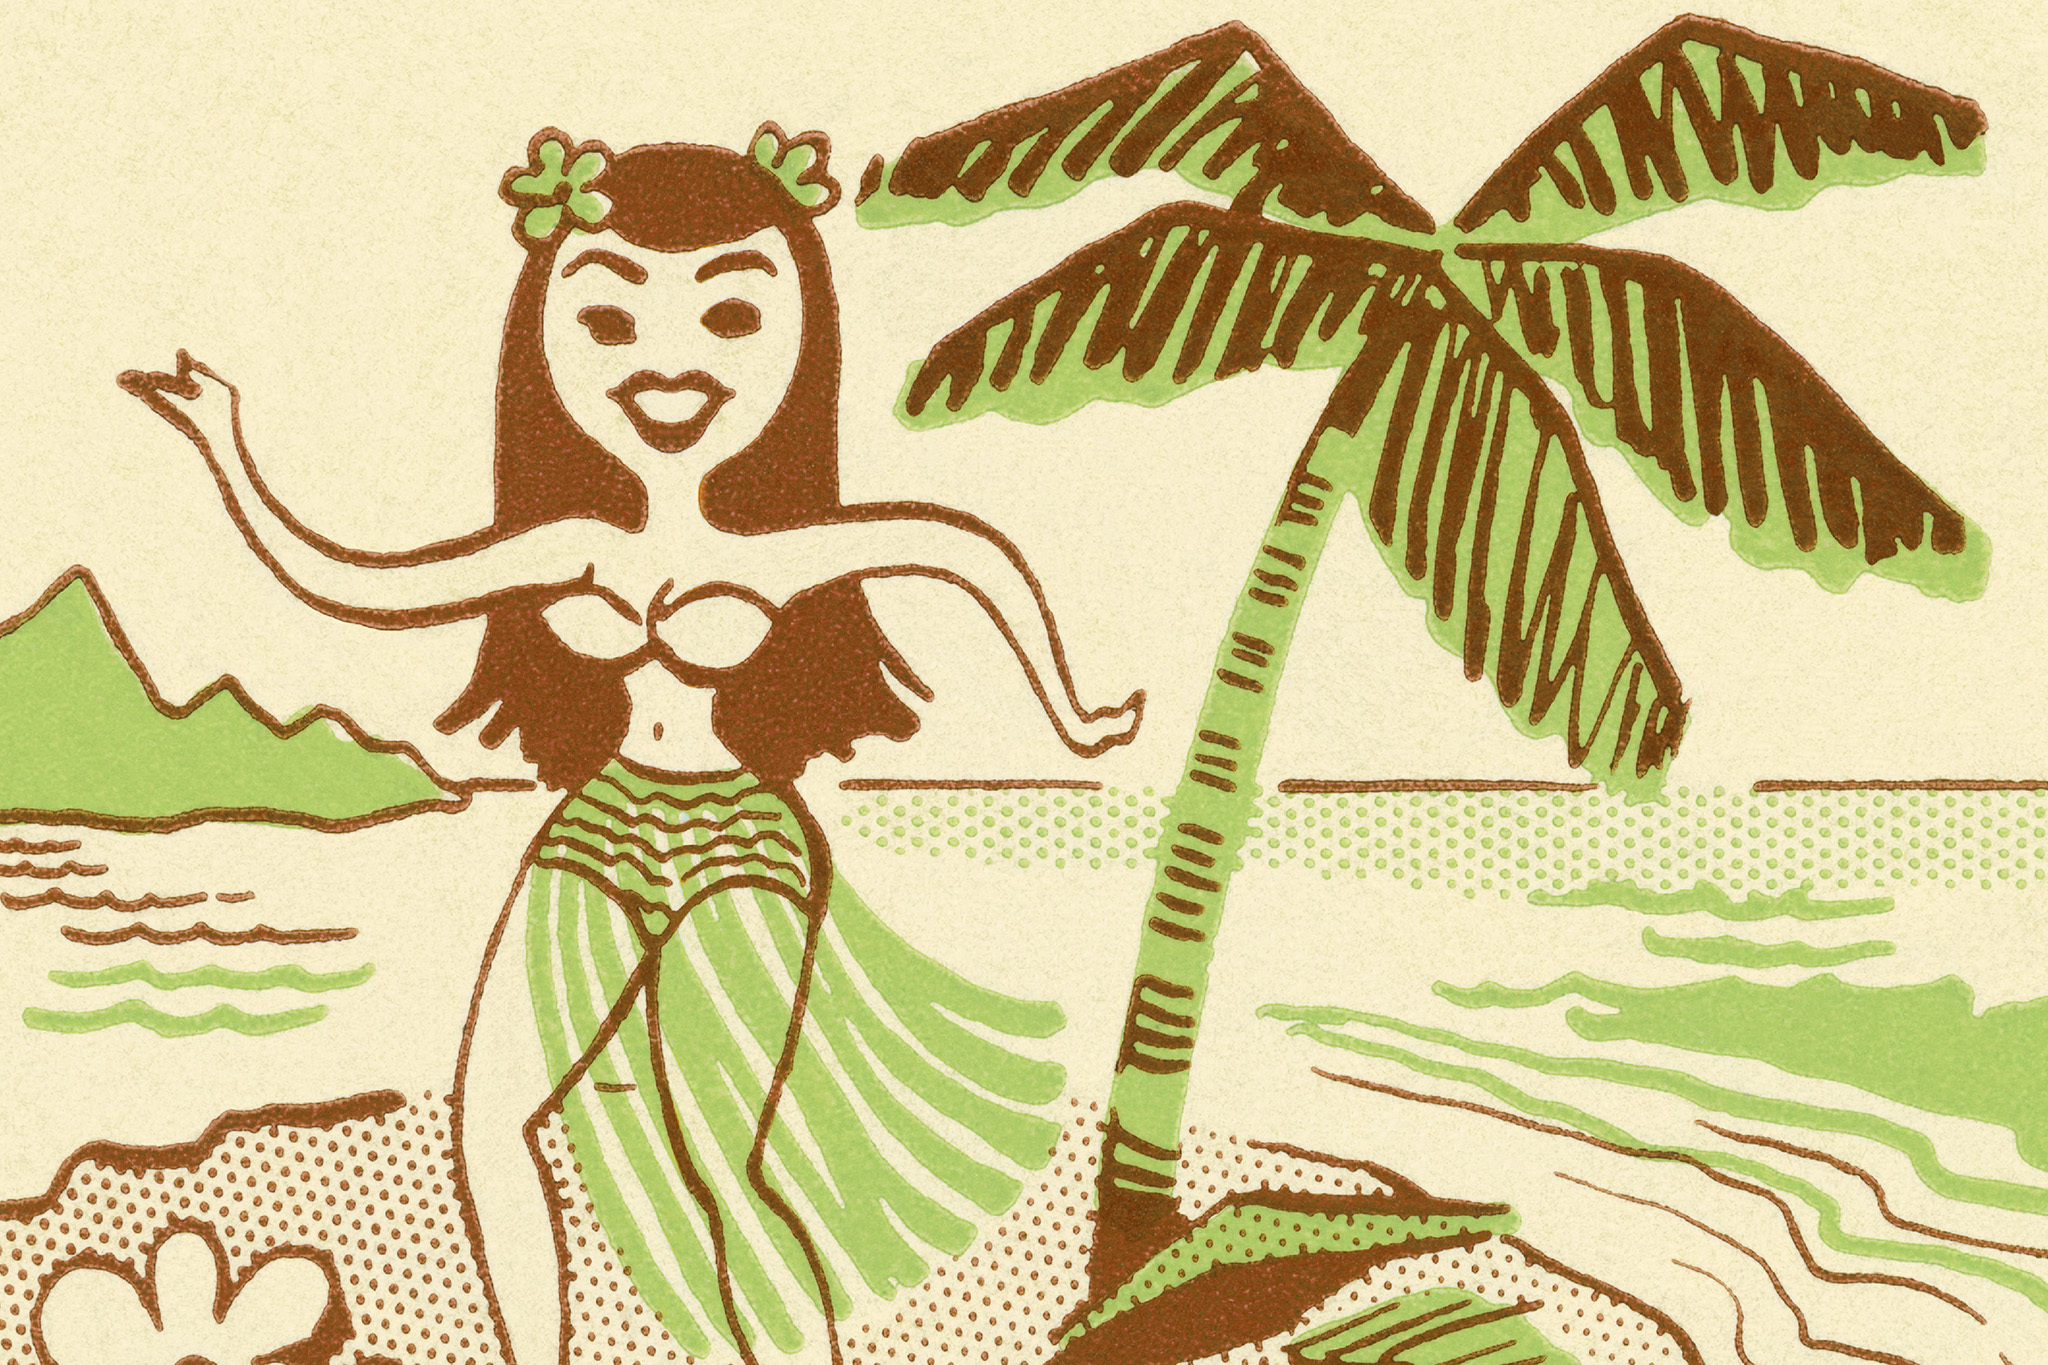 It's time to throw away the coconut bras and grass skirts